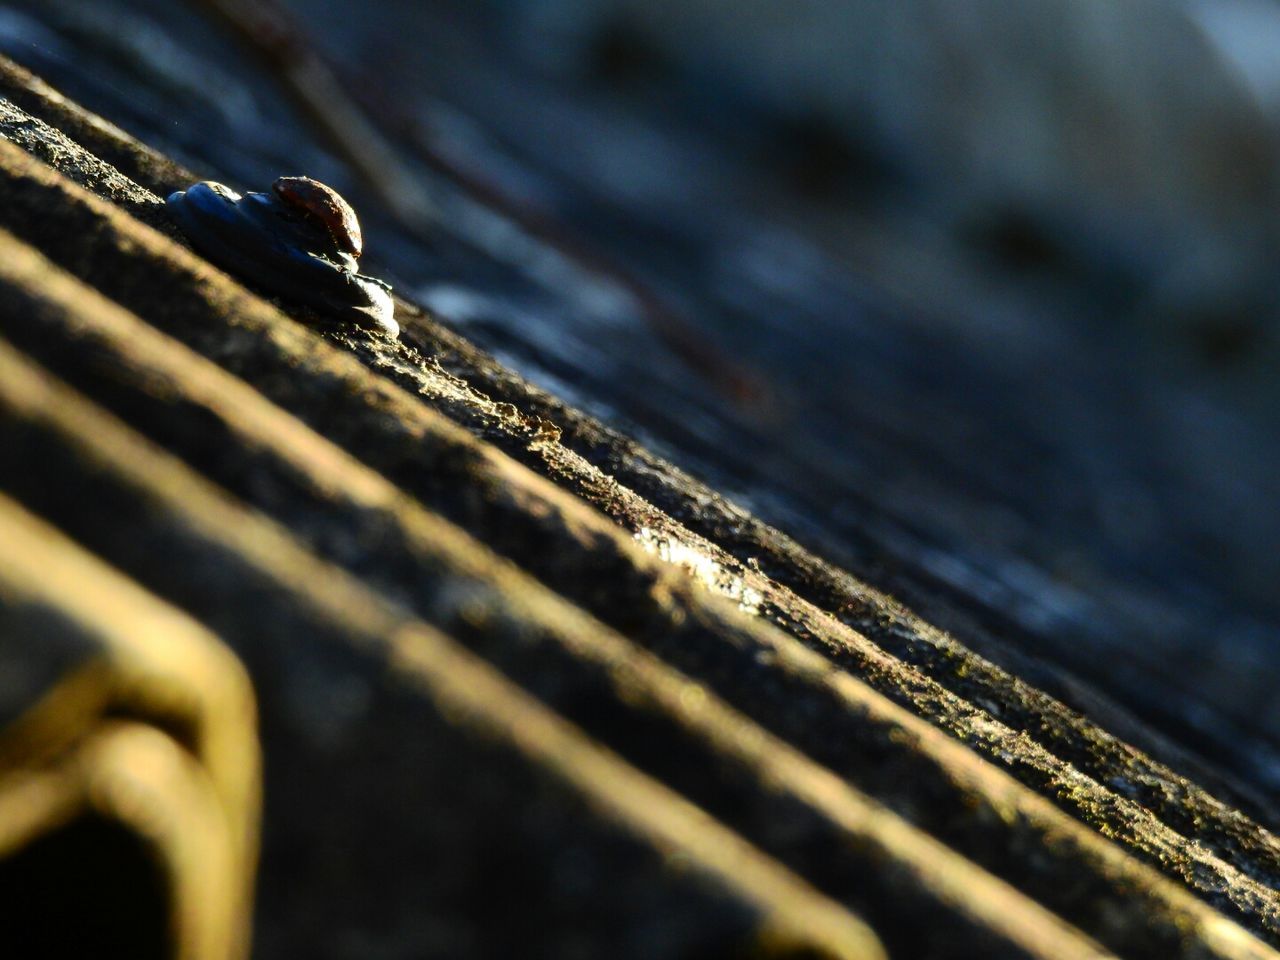 CLOSE-UP OF RUSTY WOOD ON WOODEN SURFACE